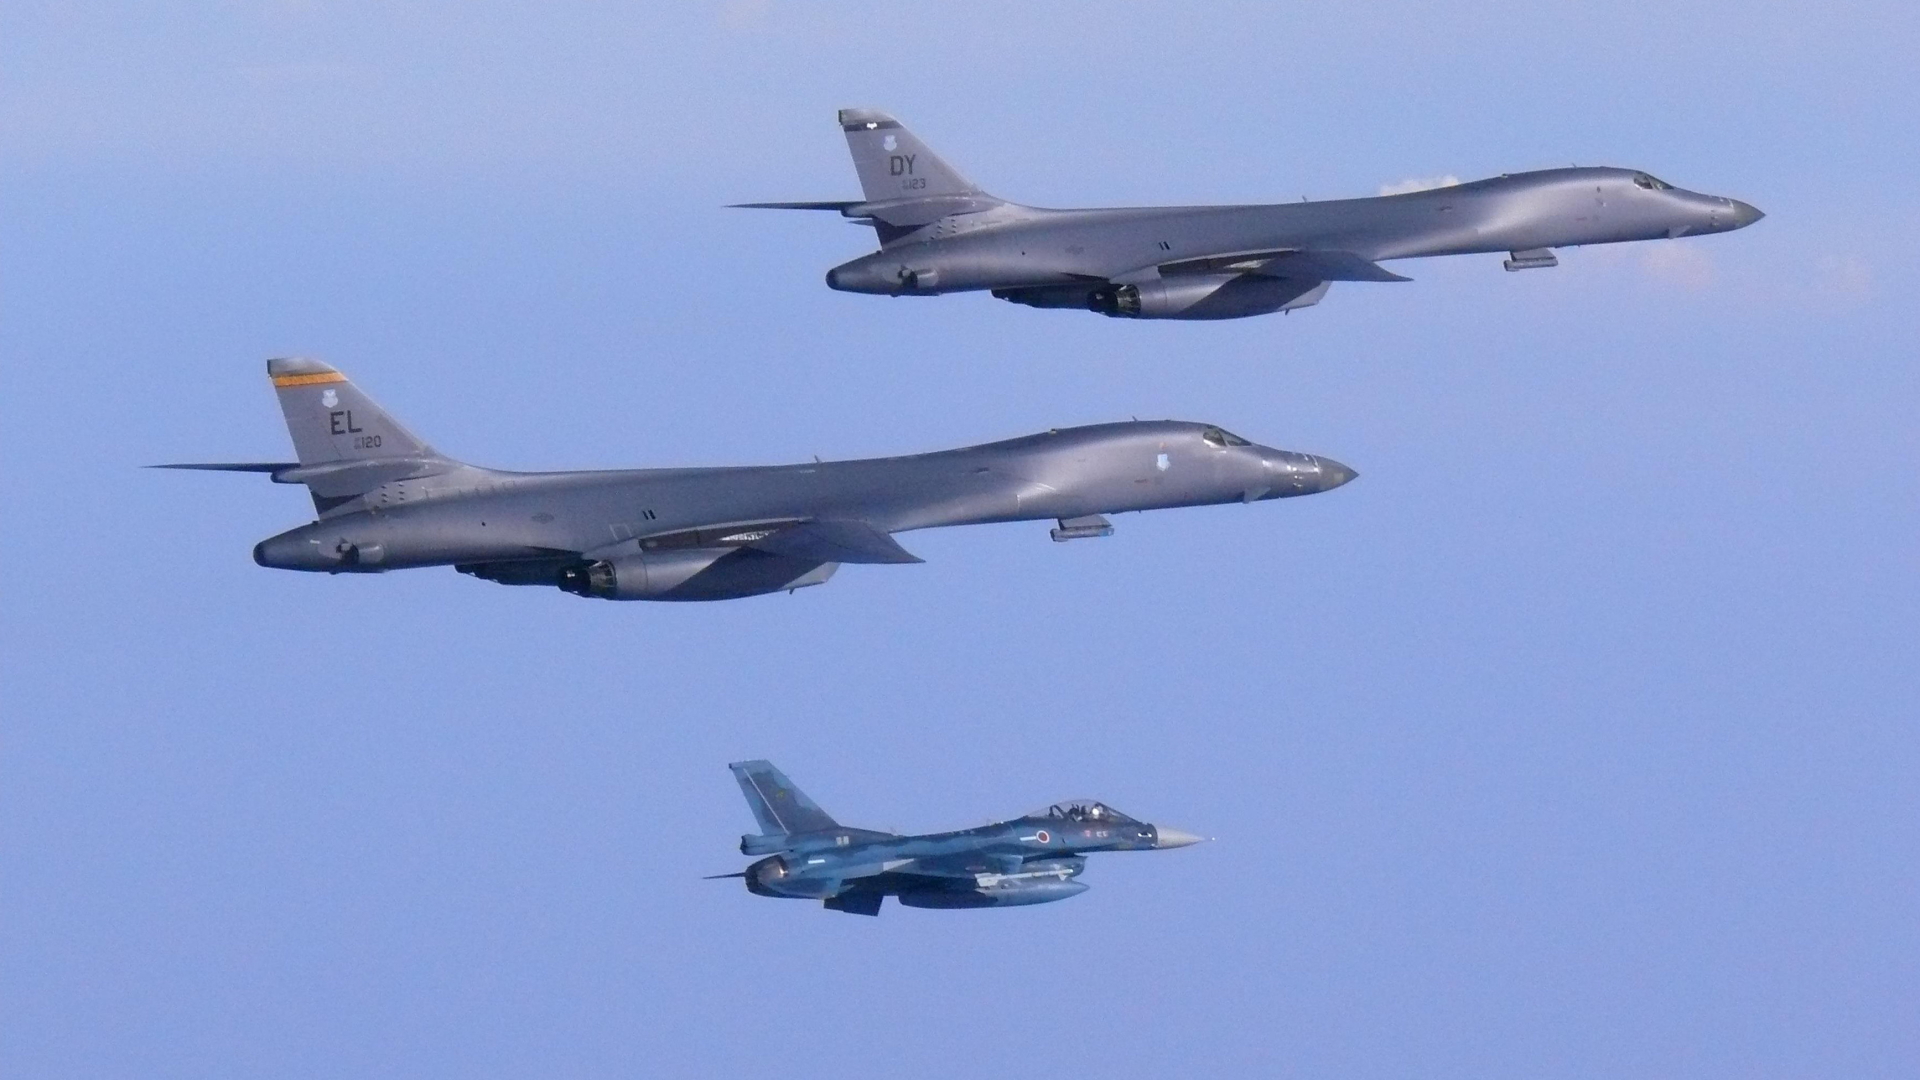 After North Korean Missile Launch: US Sends Long-Range Bombers